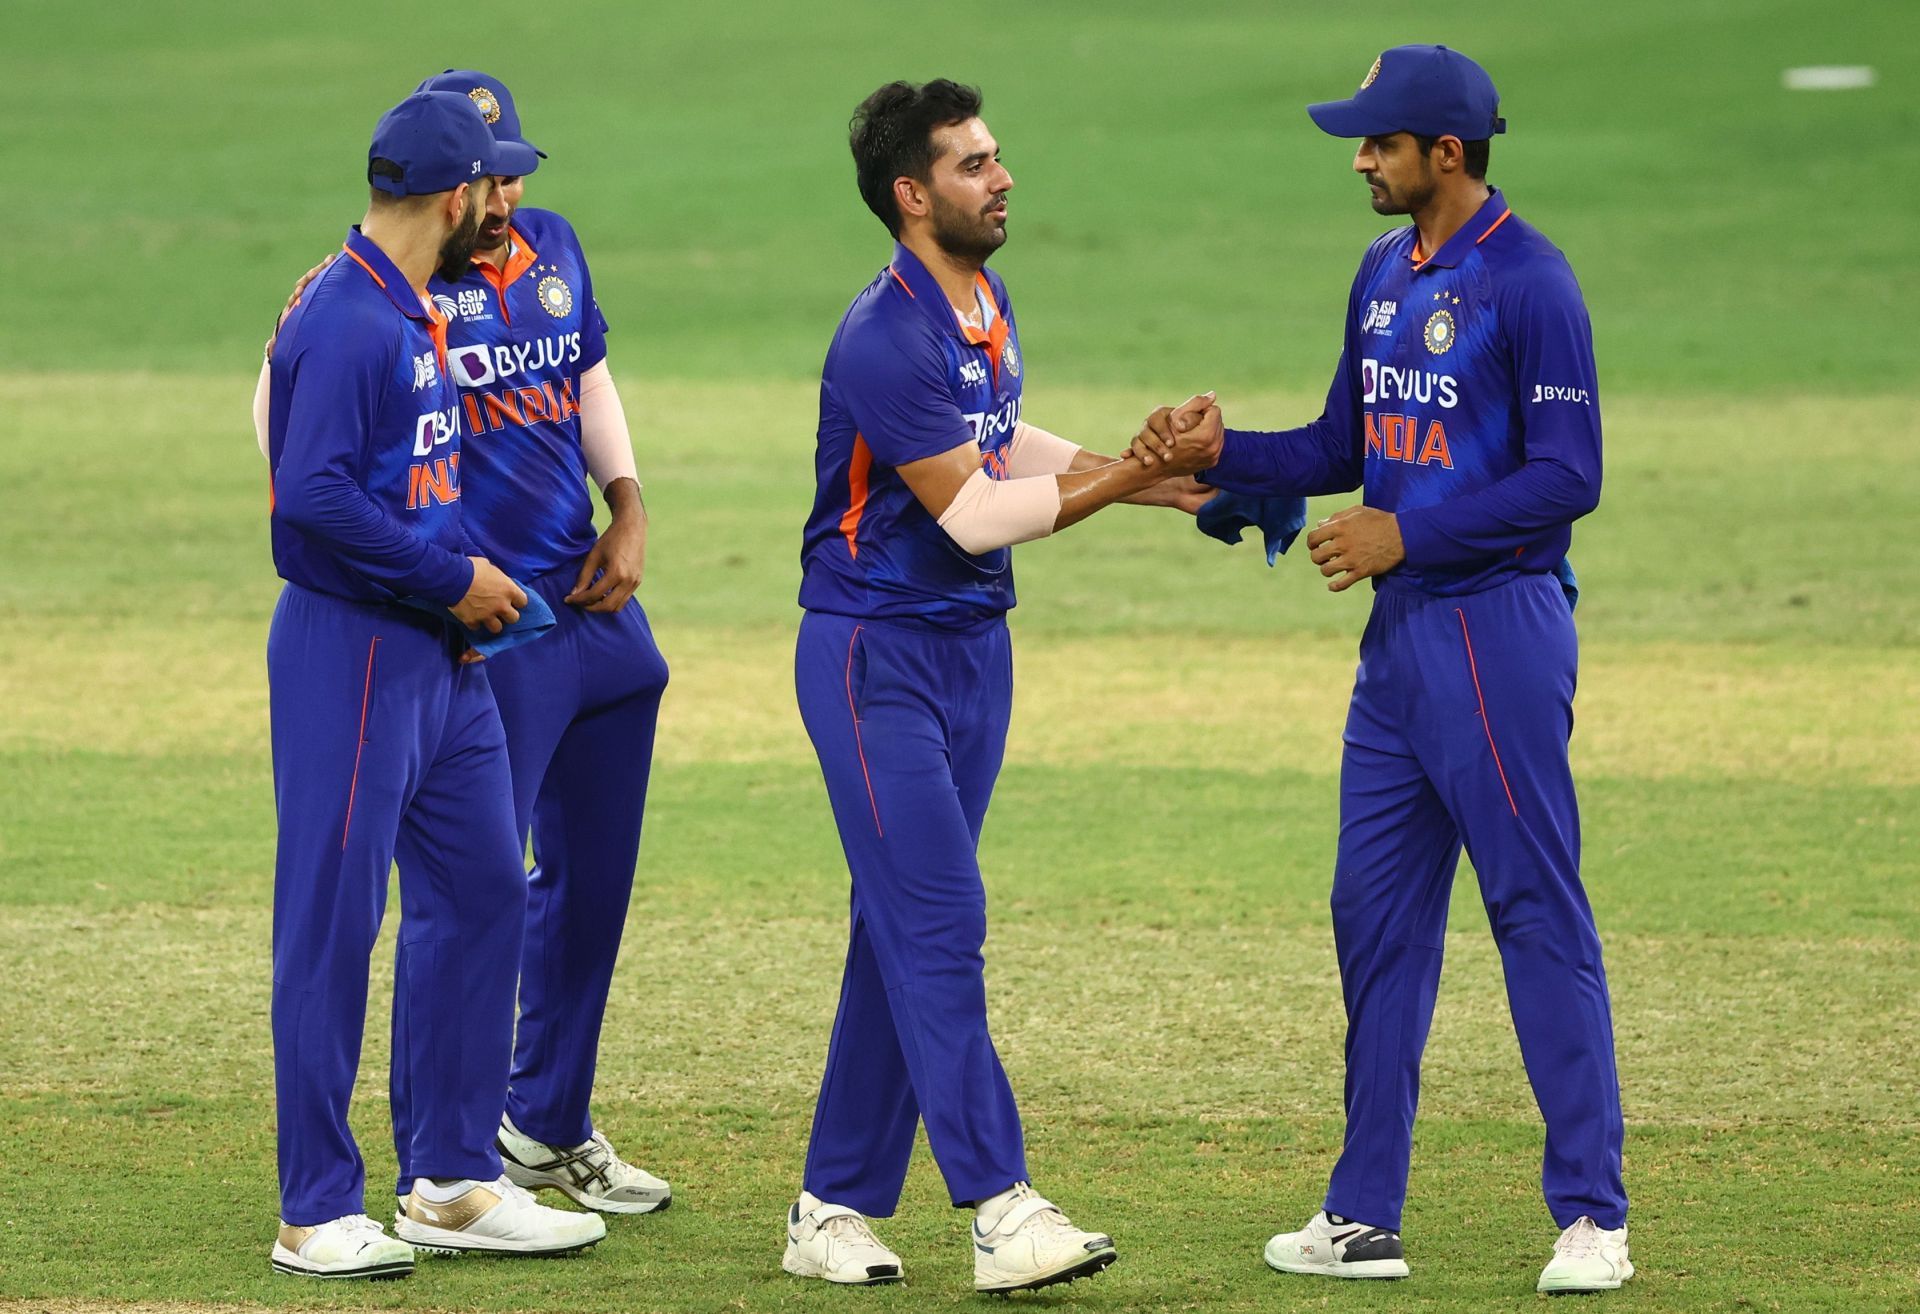 Deepak Chahar failed to pick up a wicket against Afghanistan.